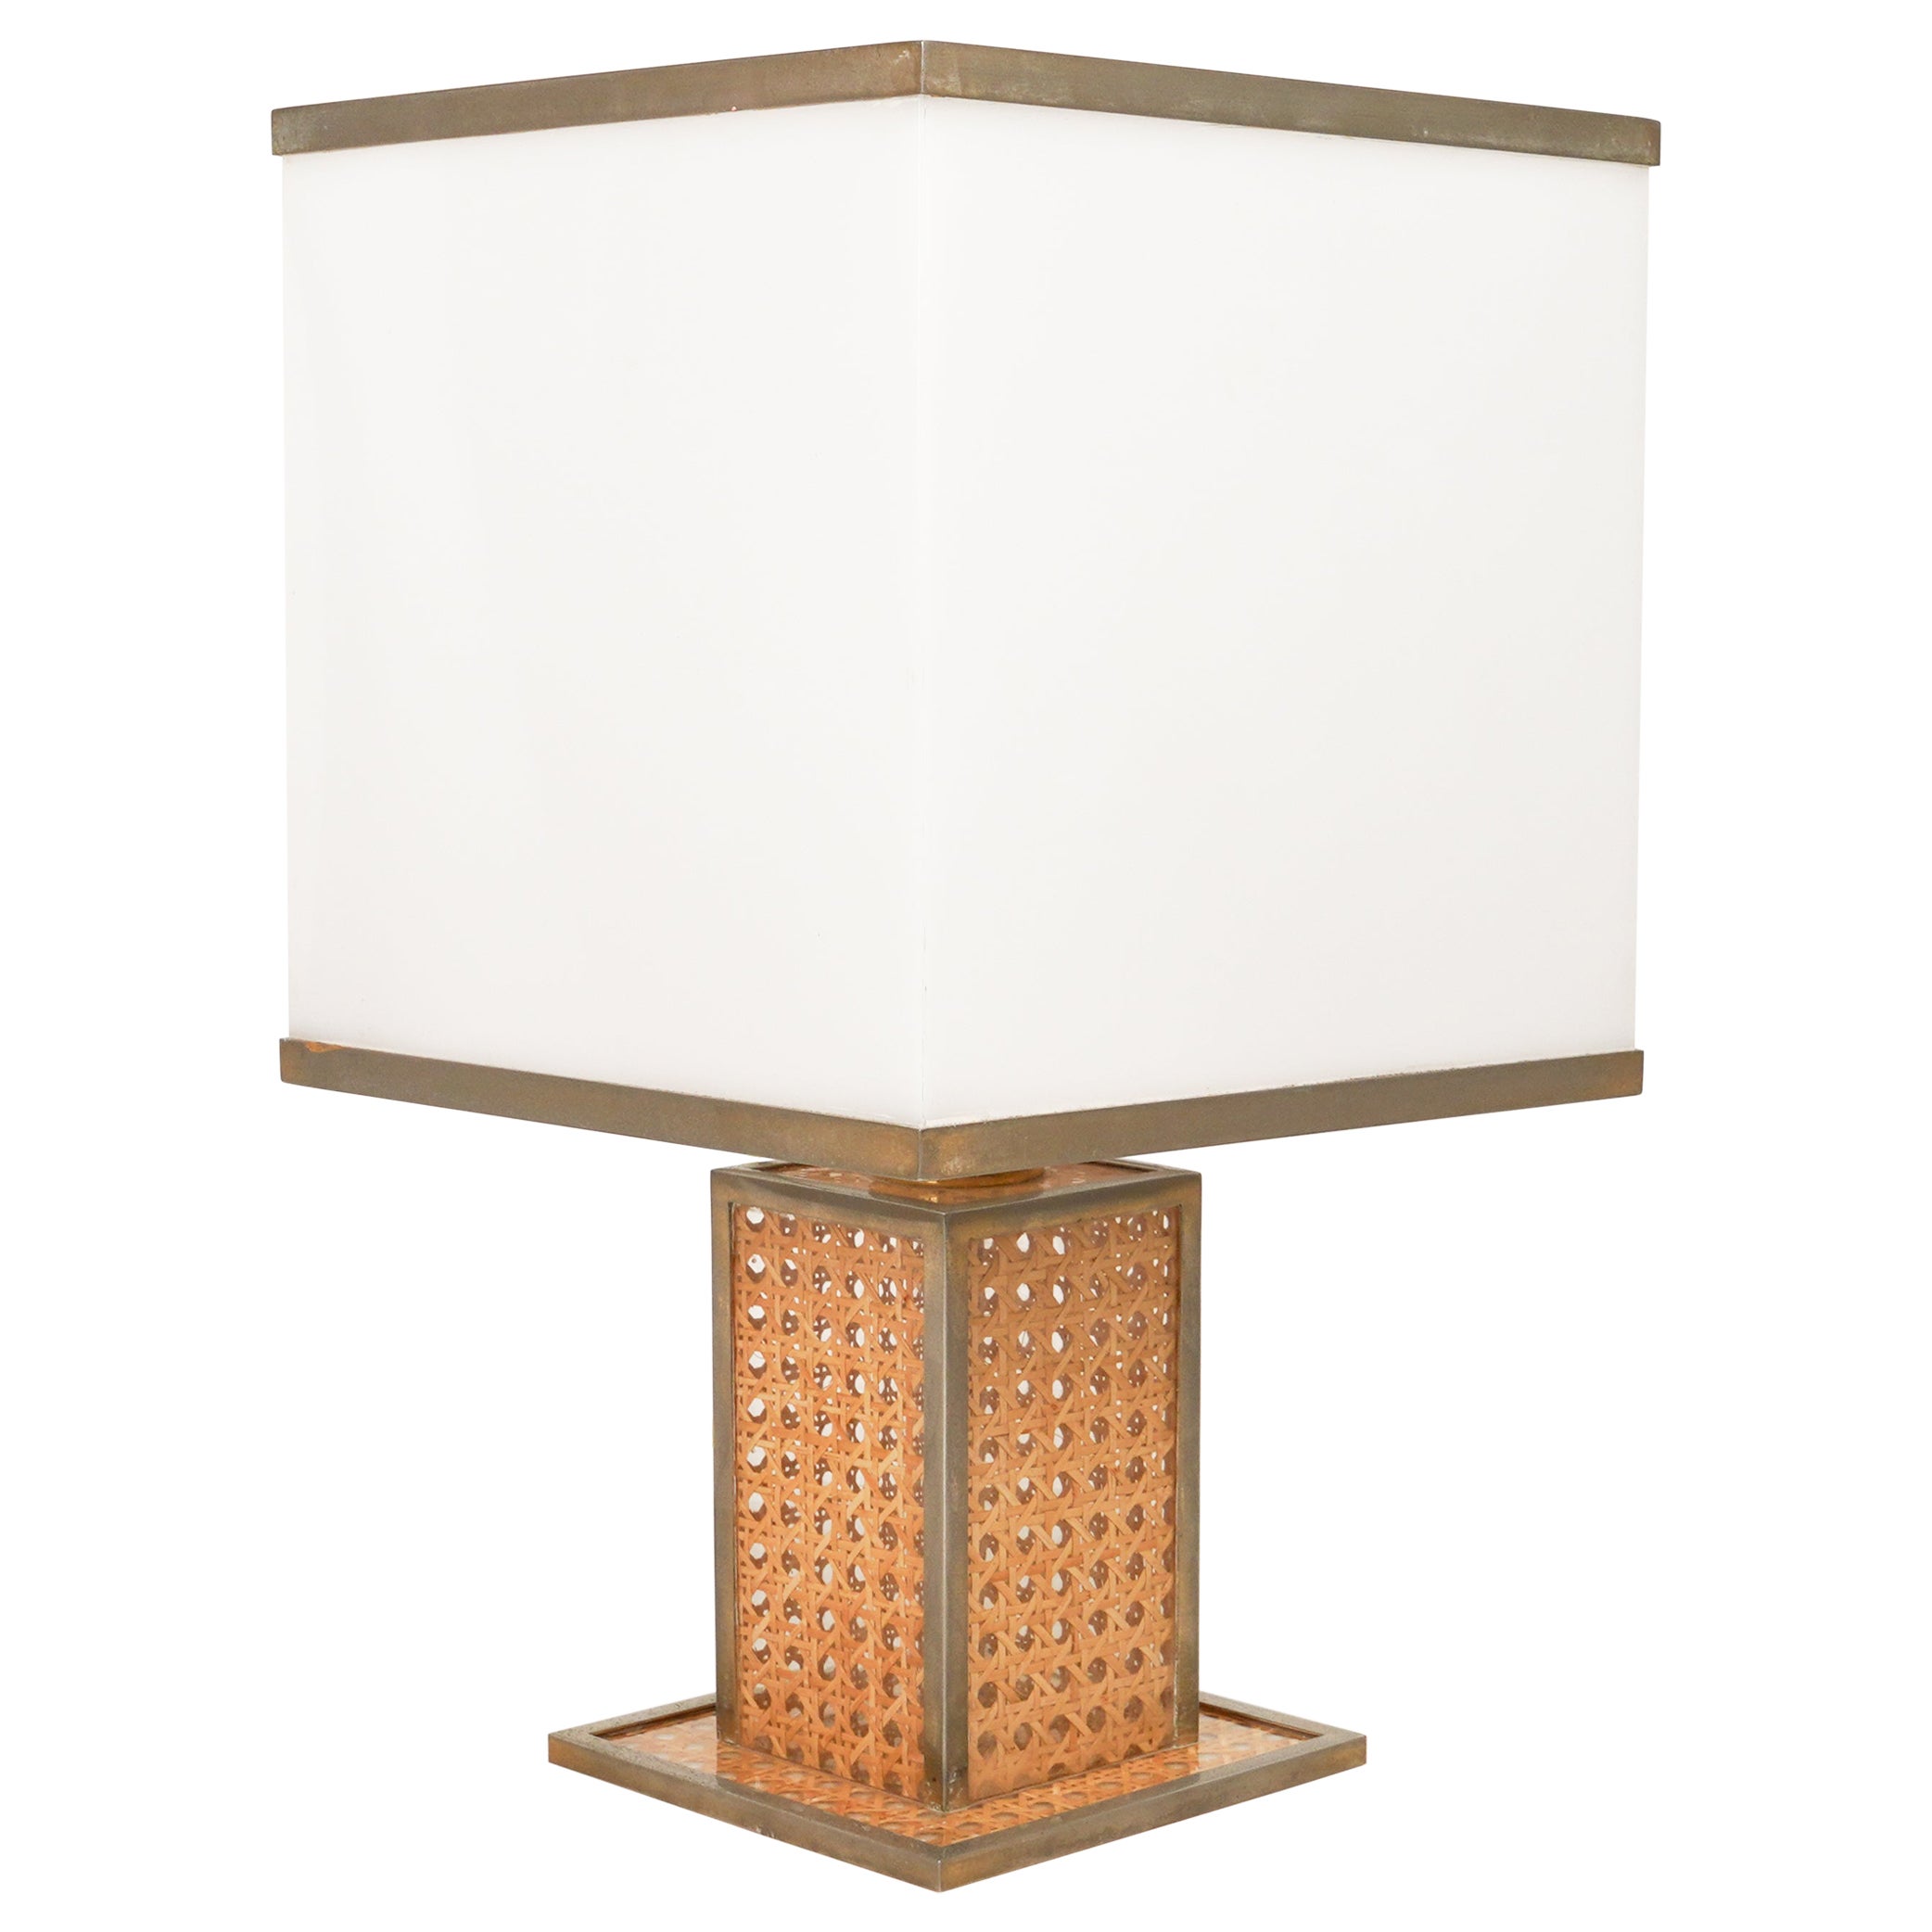 Table Lamp in Lucite, Rattan and Brass Christian Dior Style, Italy 1970s